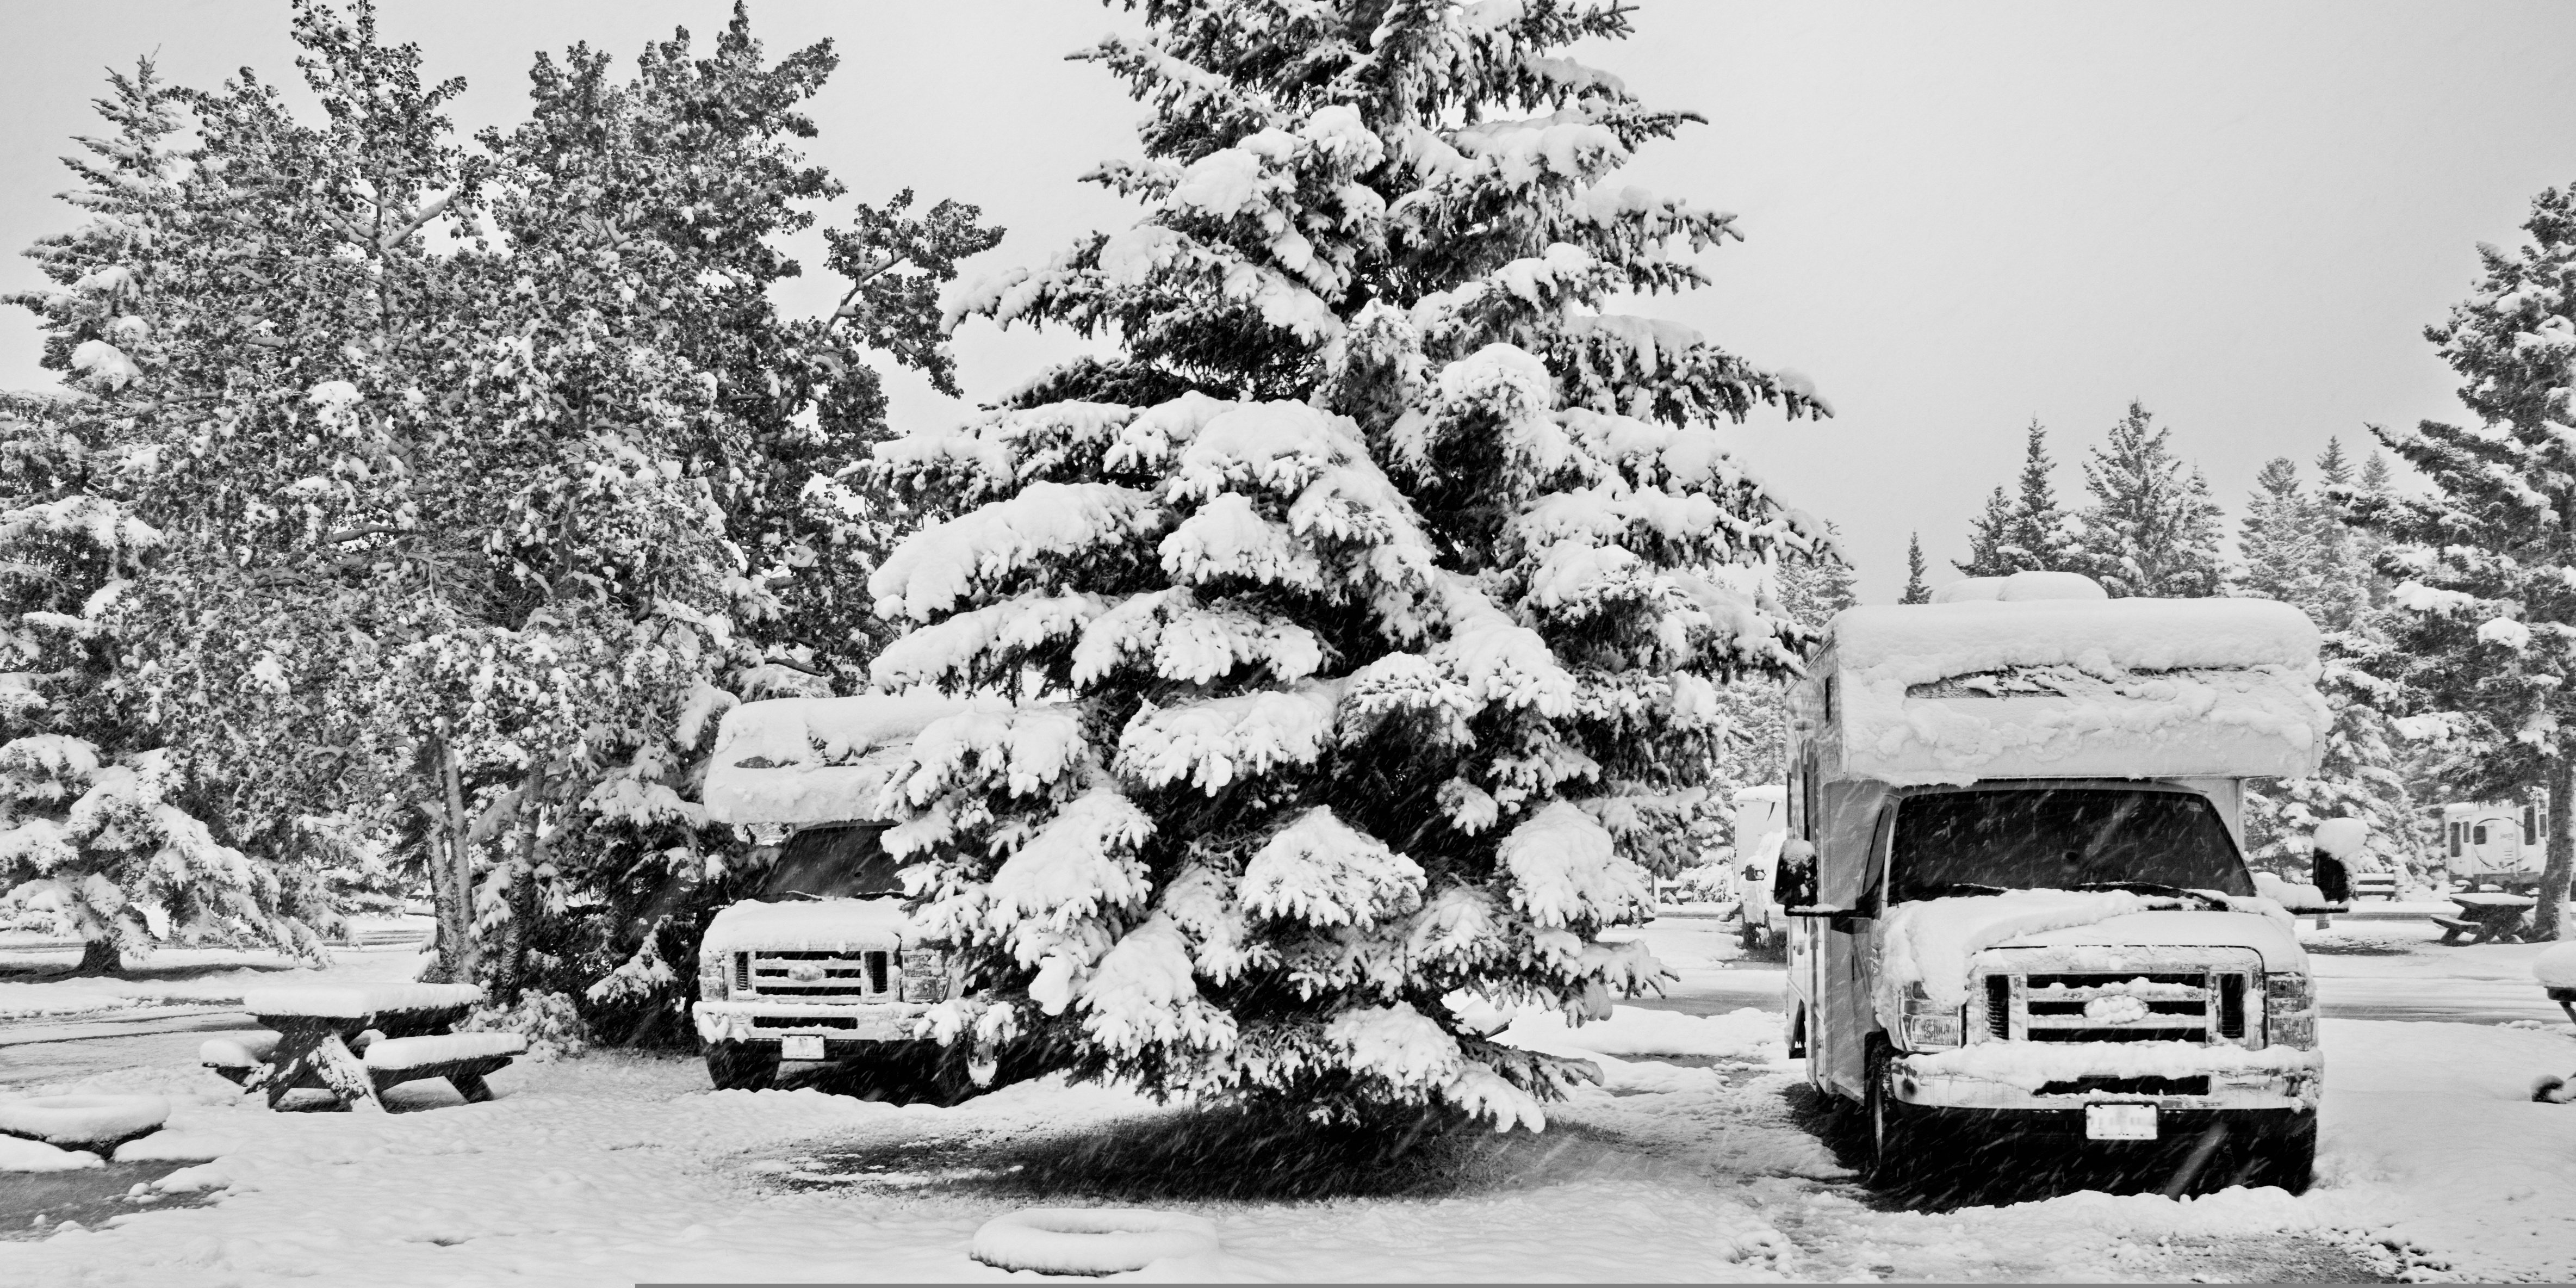 Snow-covered winter scene with RVs